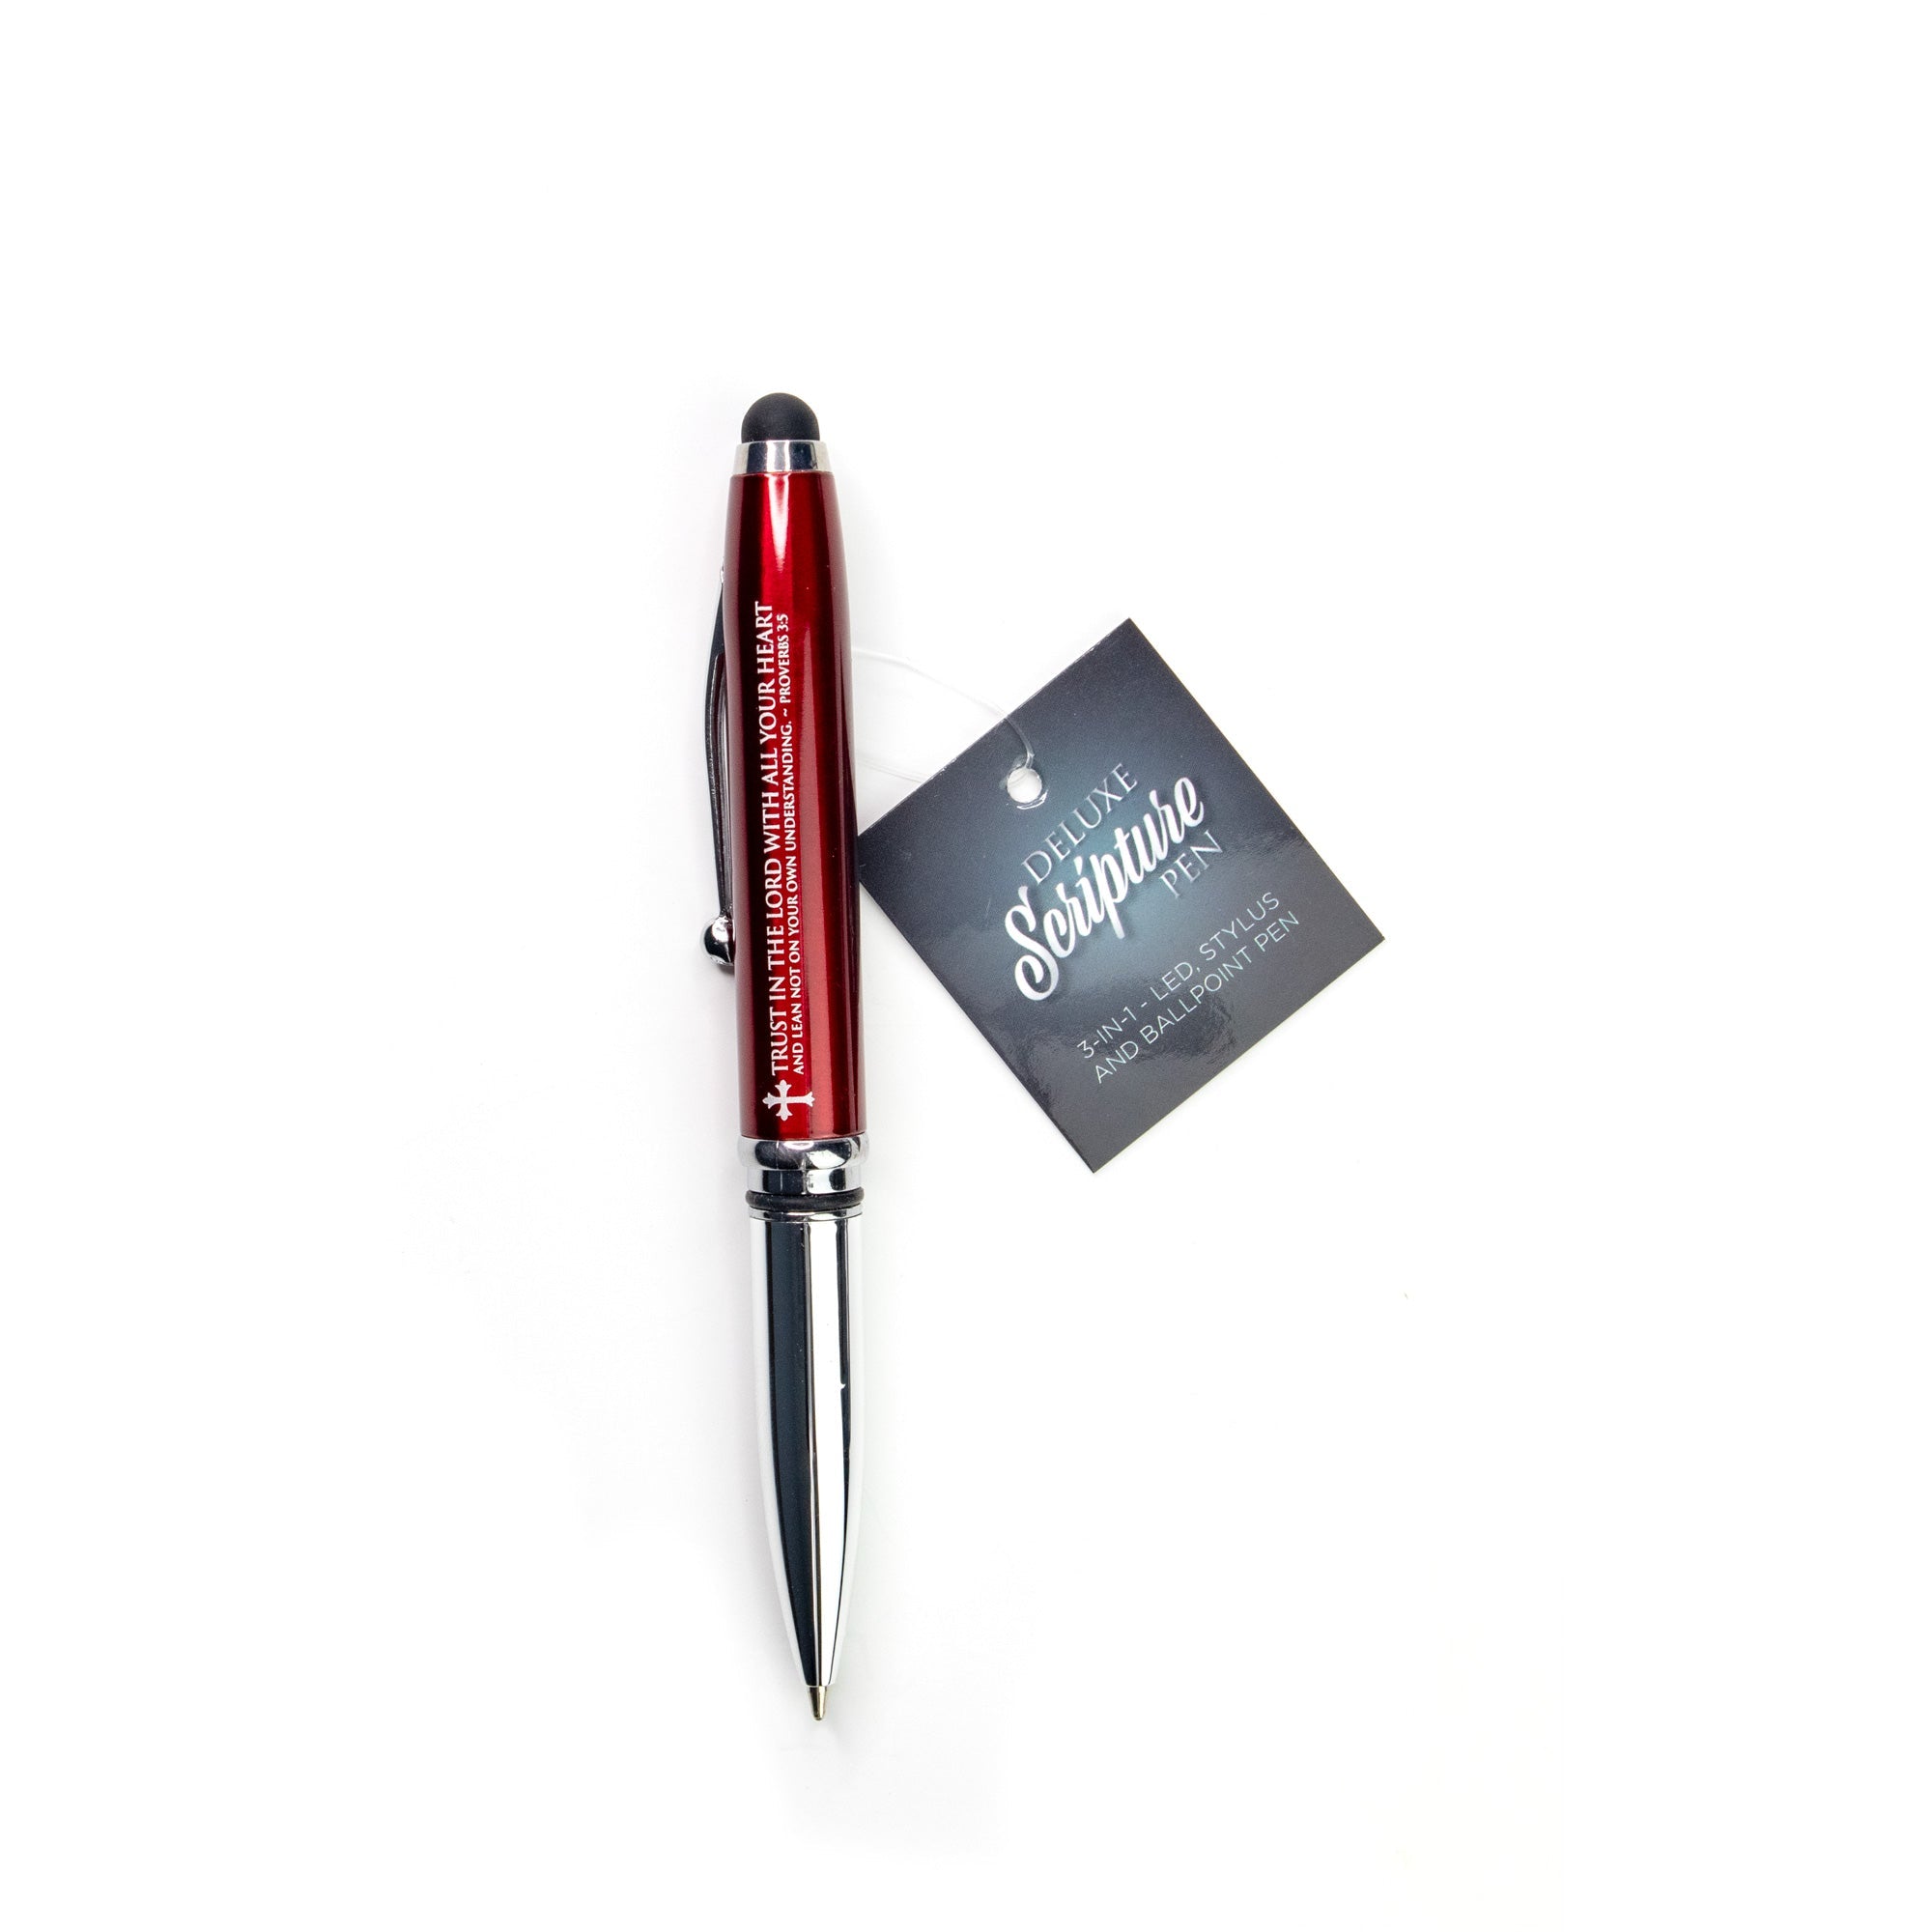 Proverbs 3:5 Deluxe Scripture Pen with Stylus, LED Light and Scripture Card - Red